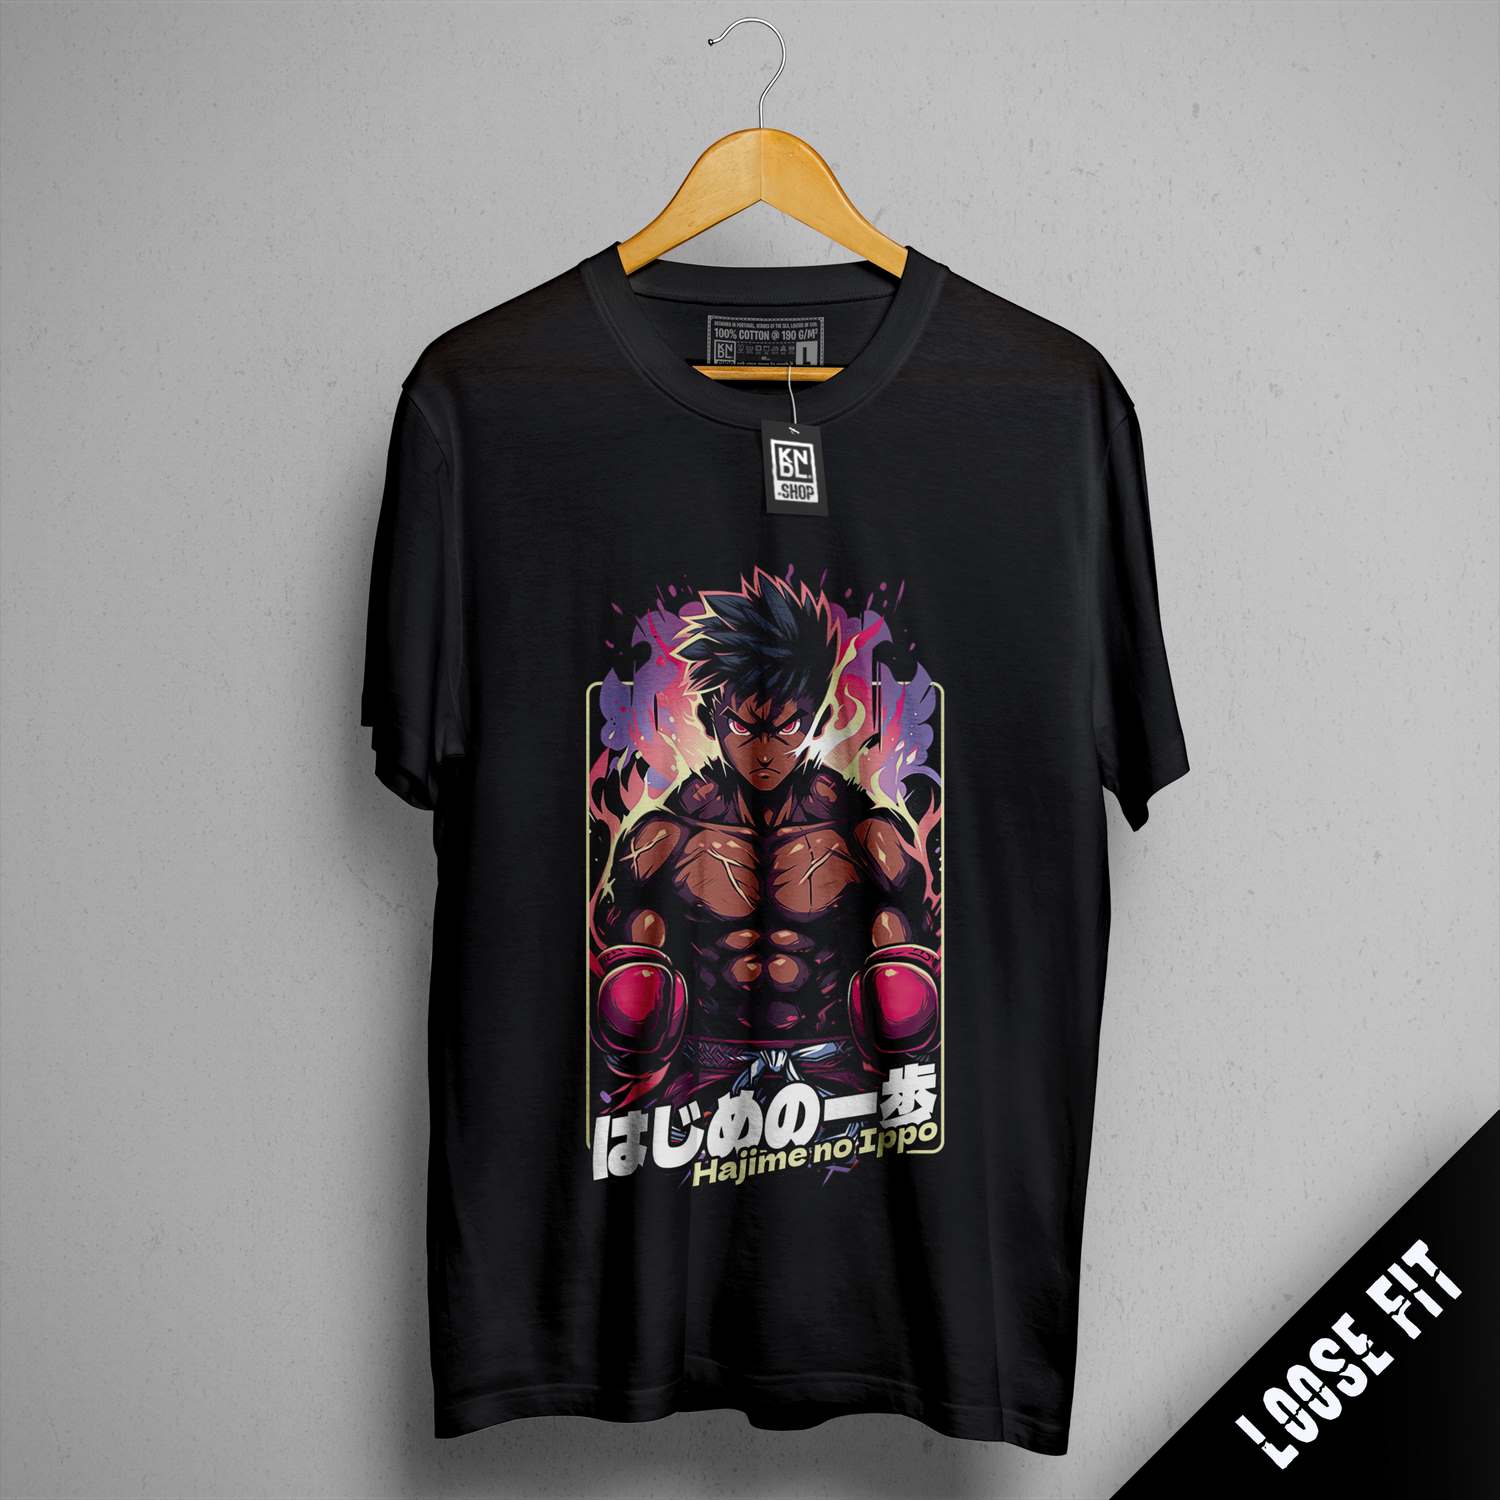 a black t - shirt with a picture of a fighter